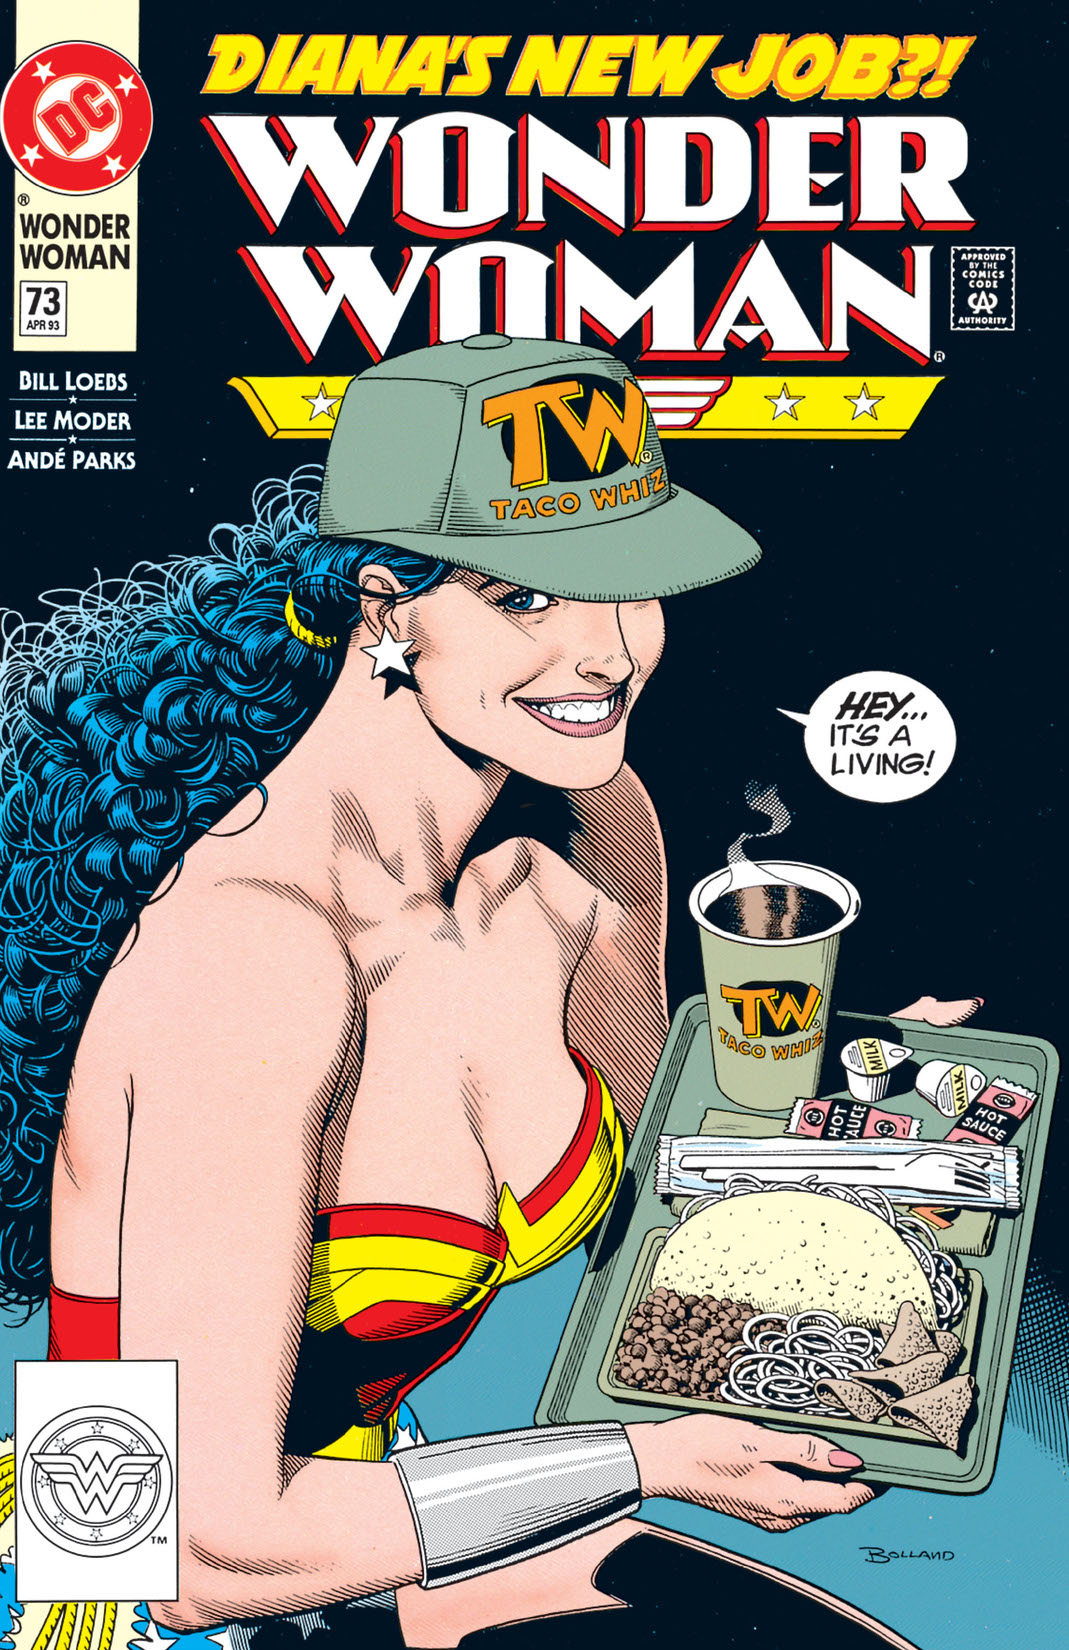 Wonder Woman (1986-) #73 preview images